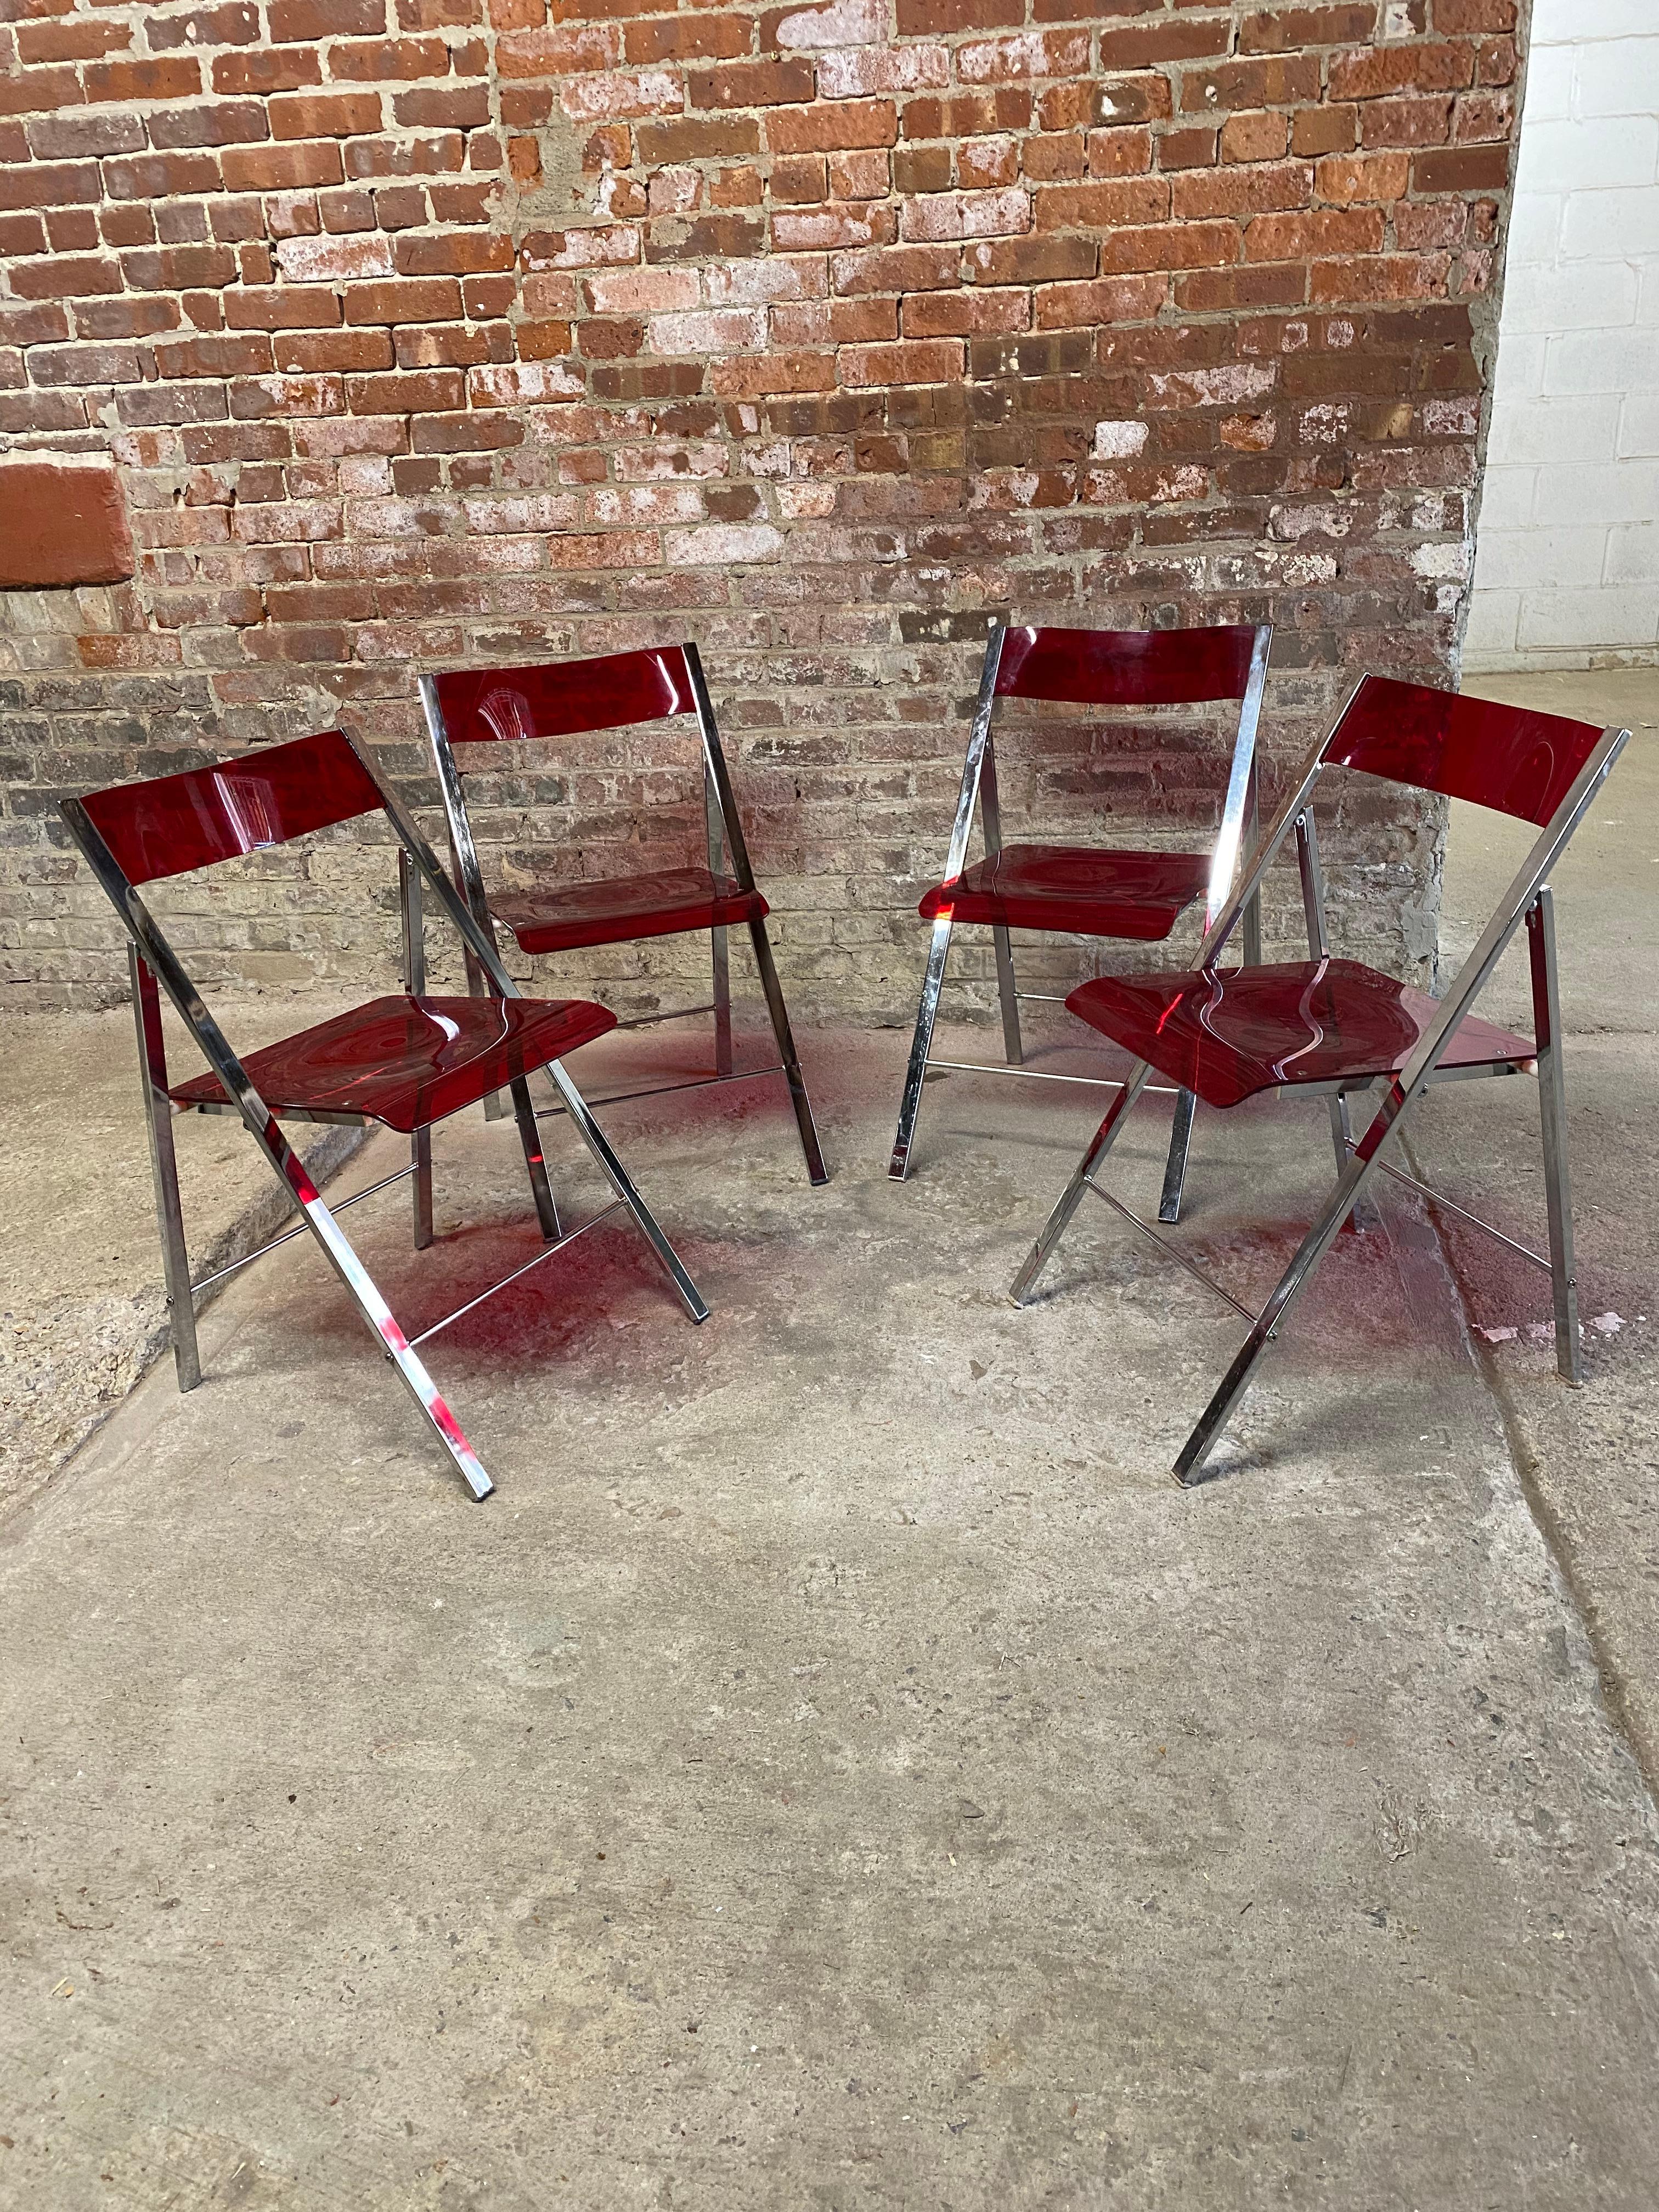 Set of four red acrylic and chrome folding chairs. Great for the small apartment or just for space saving needs. Fun and vibrant shaped red acrylic seats and back rests with flat bar chrome frames. Circa 1970-80. Good overall condition. All